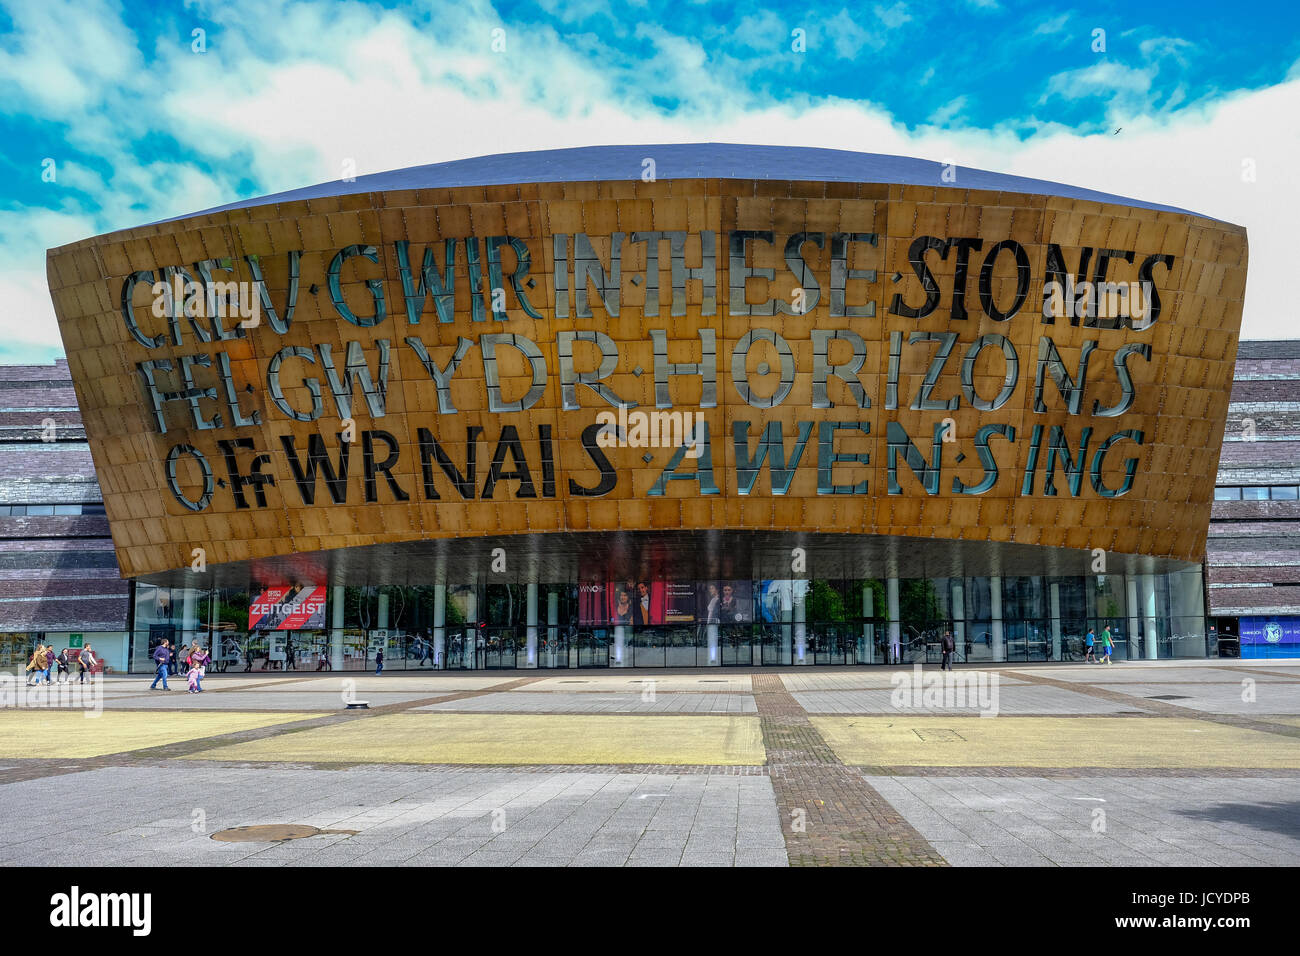 Cardiff Bay, Wales - May 20,2017: Millennium Centre for Arts, face-on view. 'Creating trth like glass from inspiration's furnace.' Stock Photo